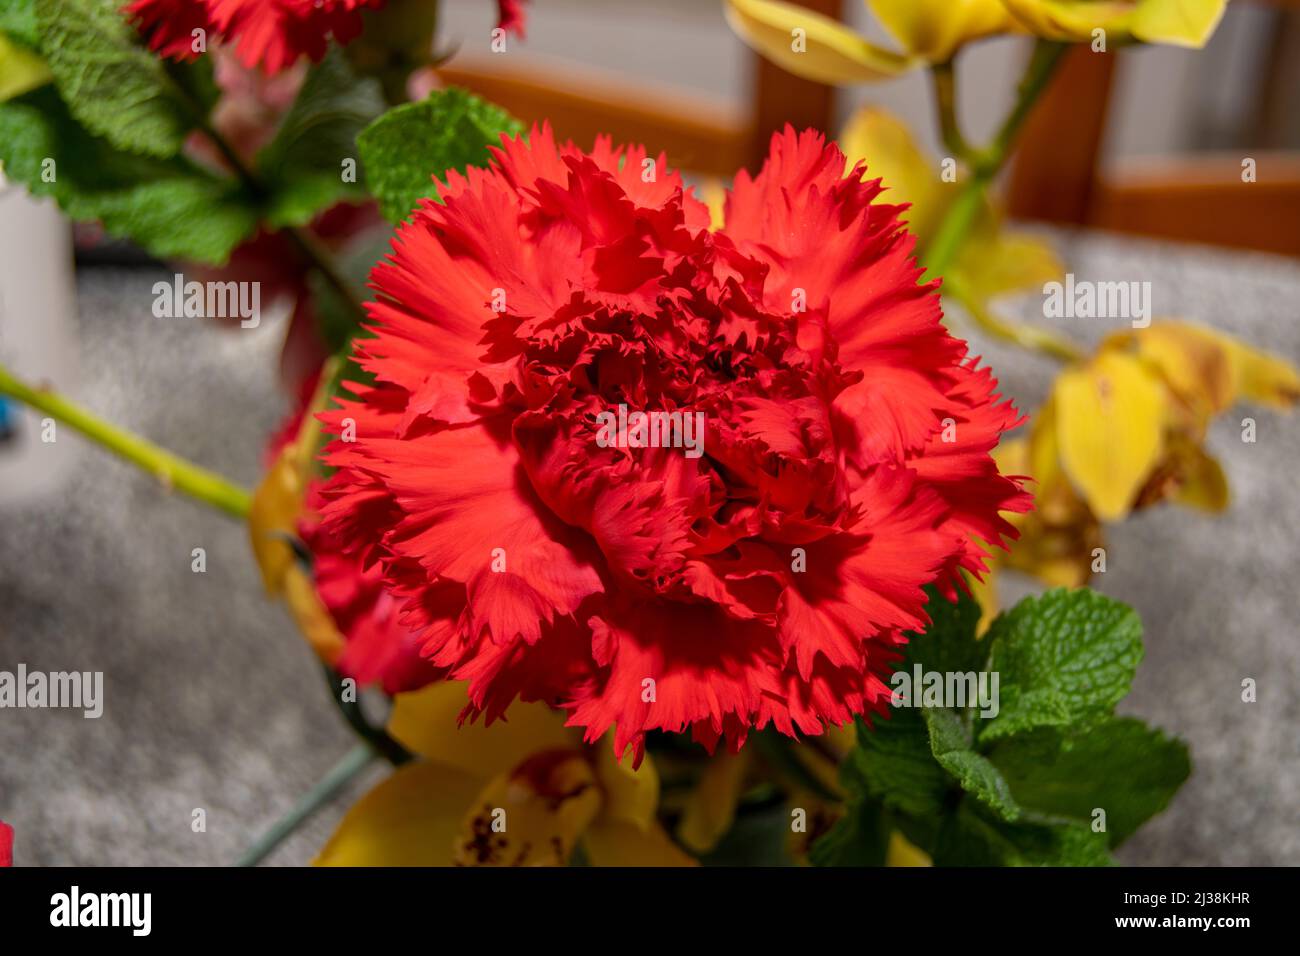 Dianthus Flowers, Carnation flower, The red carnation is related to feelings like esteem, affection, admiration and love. National Flower of Spain. Stock Photo